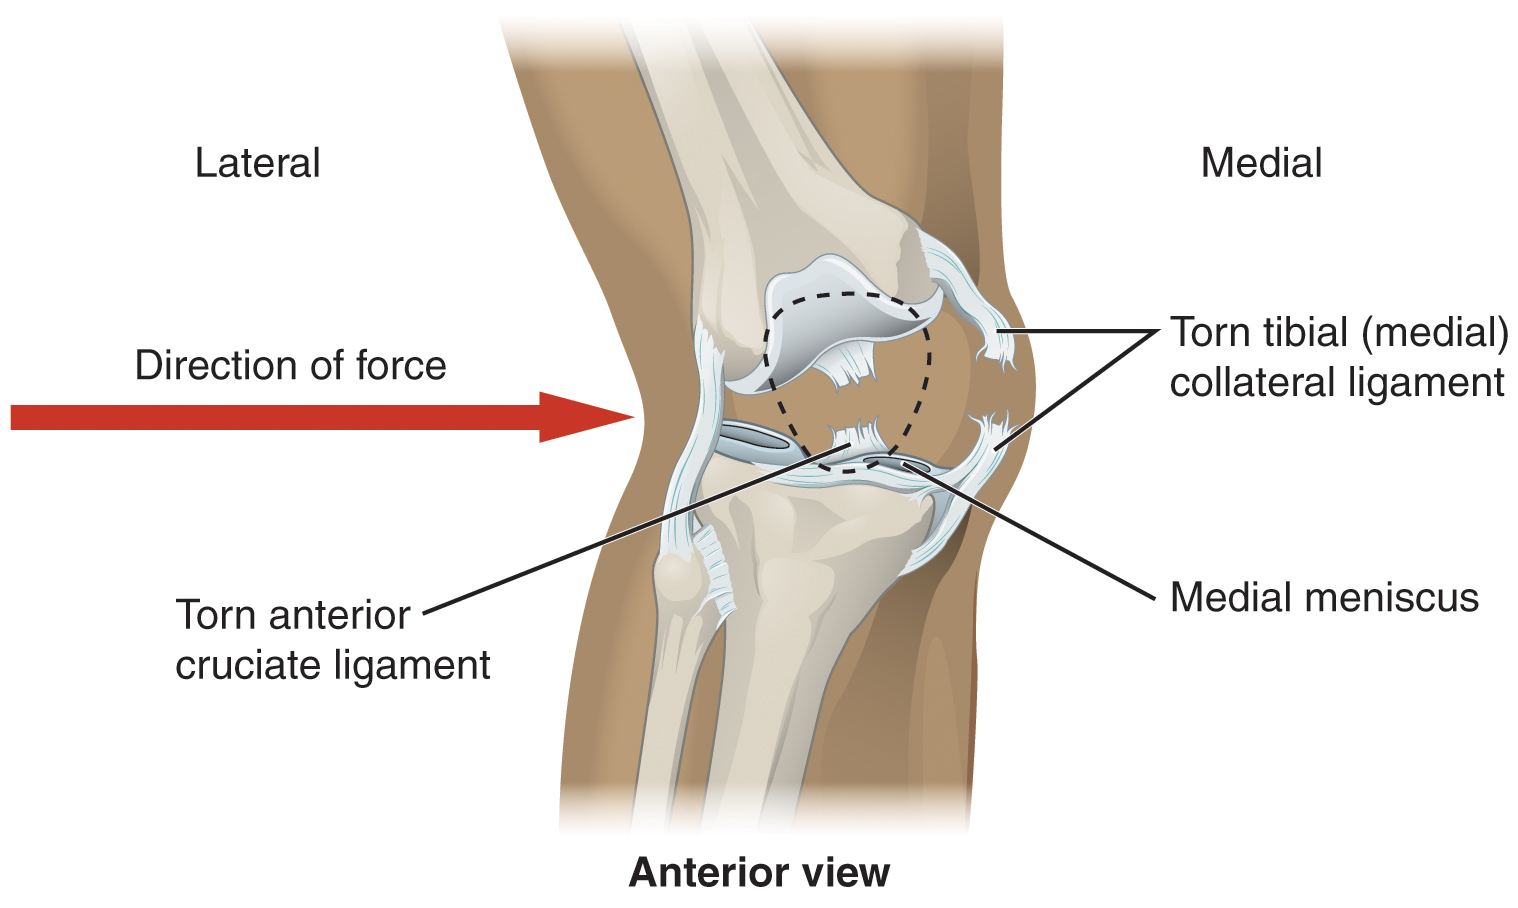 This image shows an injured knee joint. A red arrow points from left to right showing the direction of force that caused the injury.